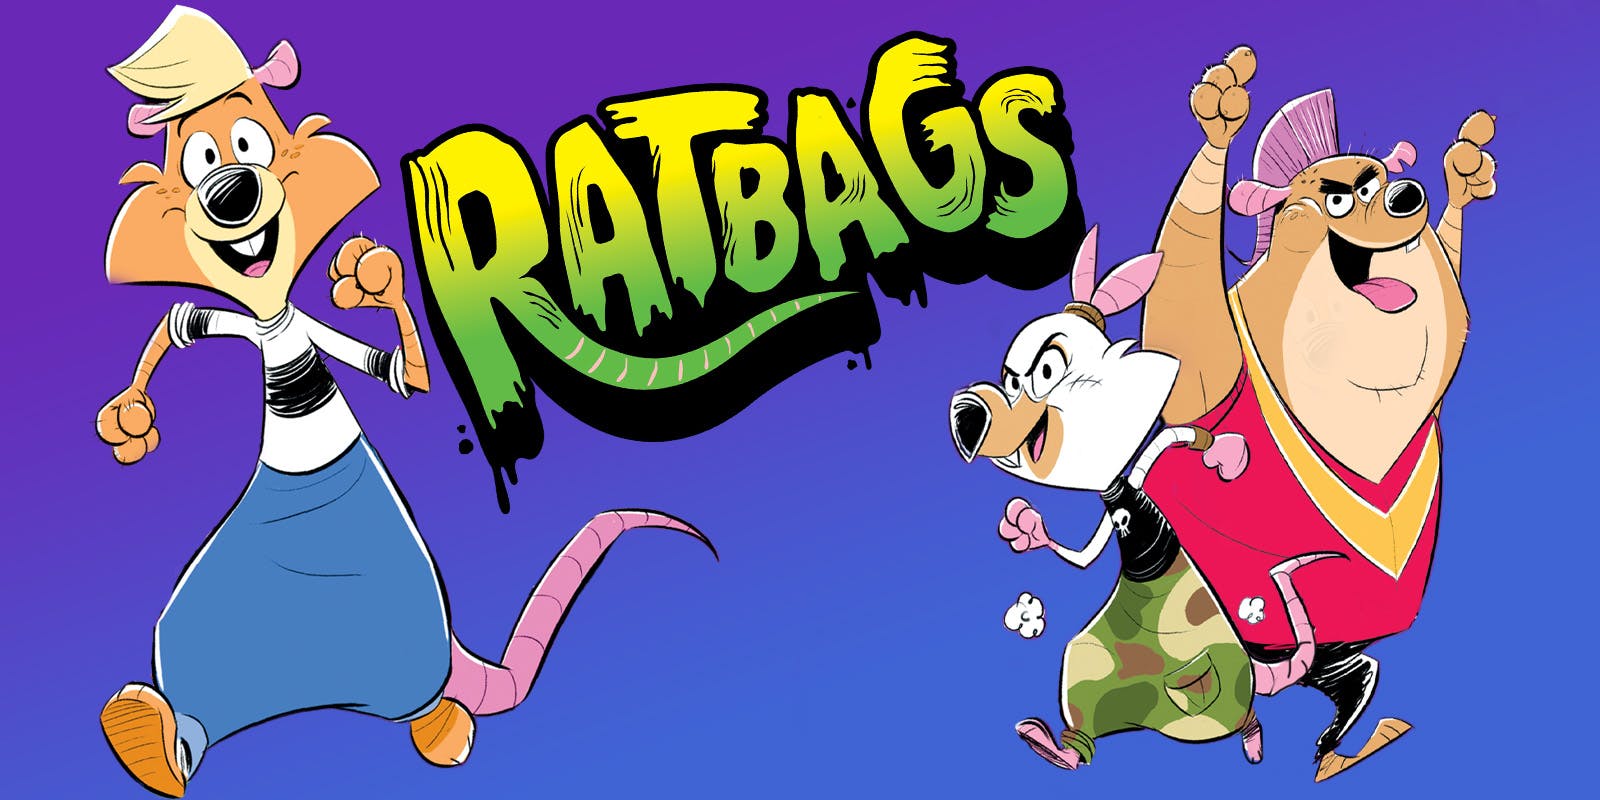 Ratbags is the fun new children's series you don't want to miss